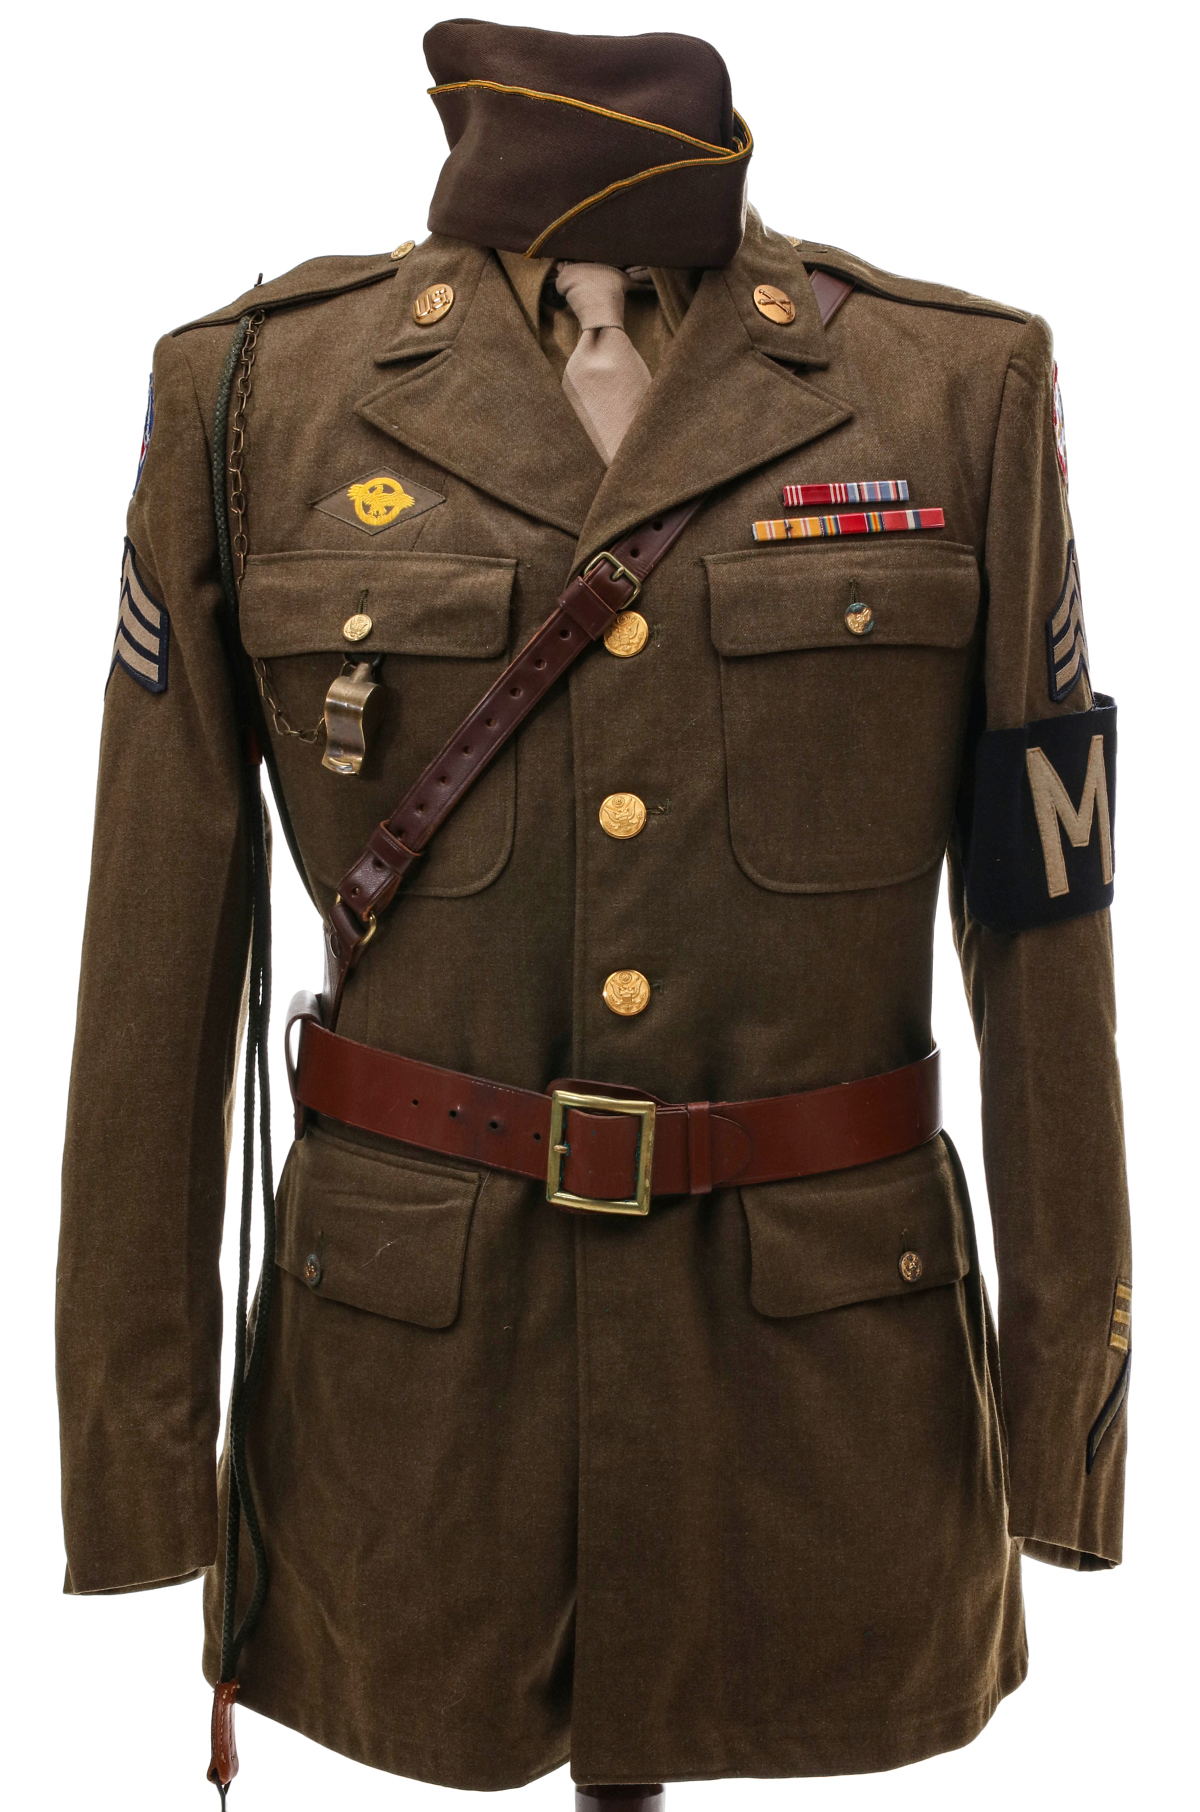 SGT HAROLD FORSBERG MP UNIFORM WITH ACCOUTERMENTS